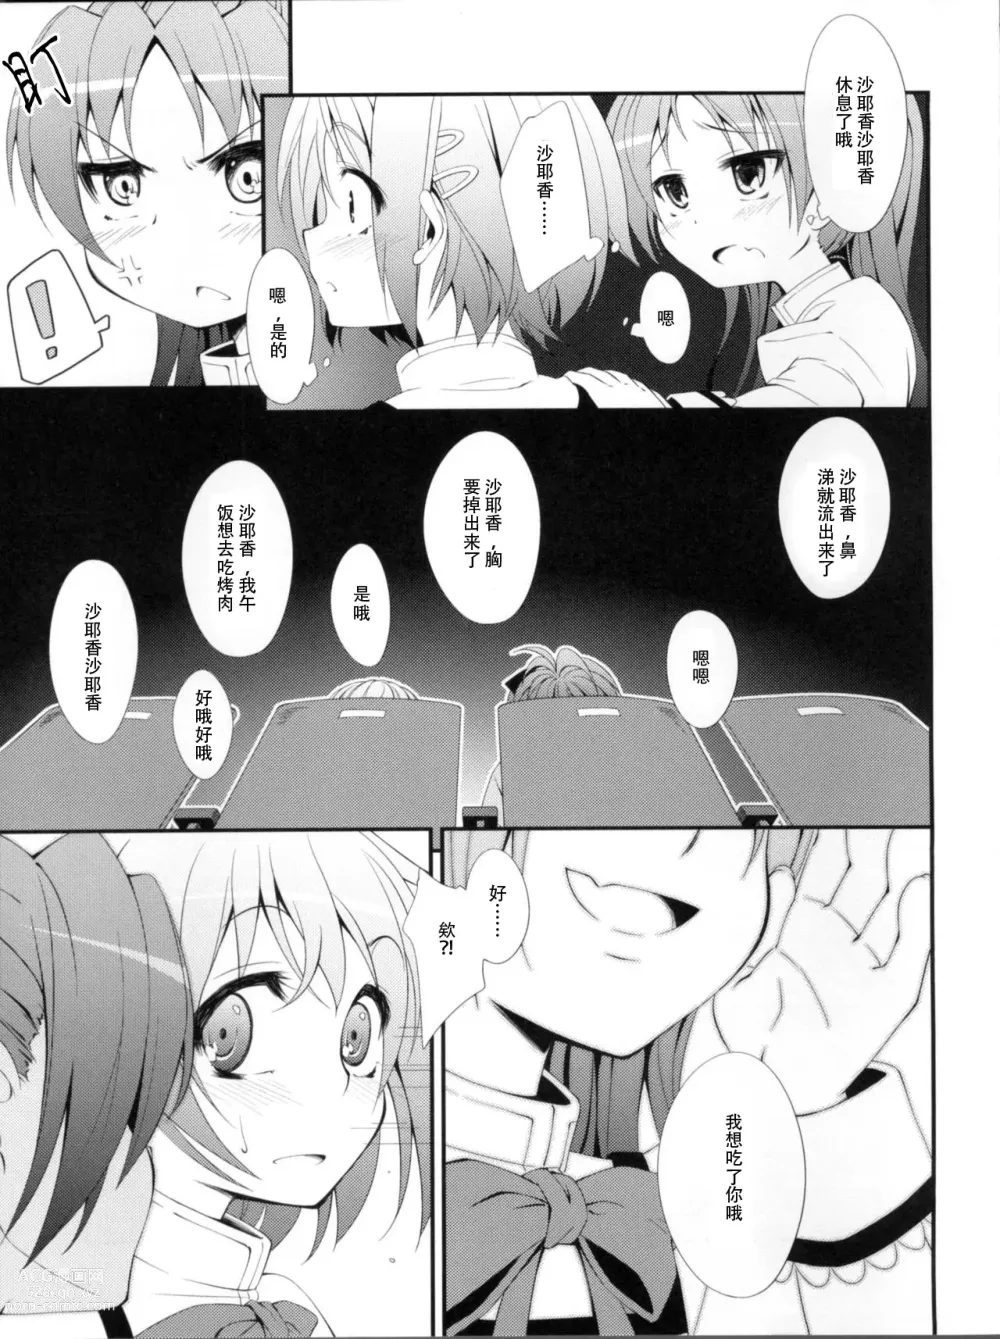 Page 6 of doujinshi Lovely Girls Lily vol. 2